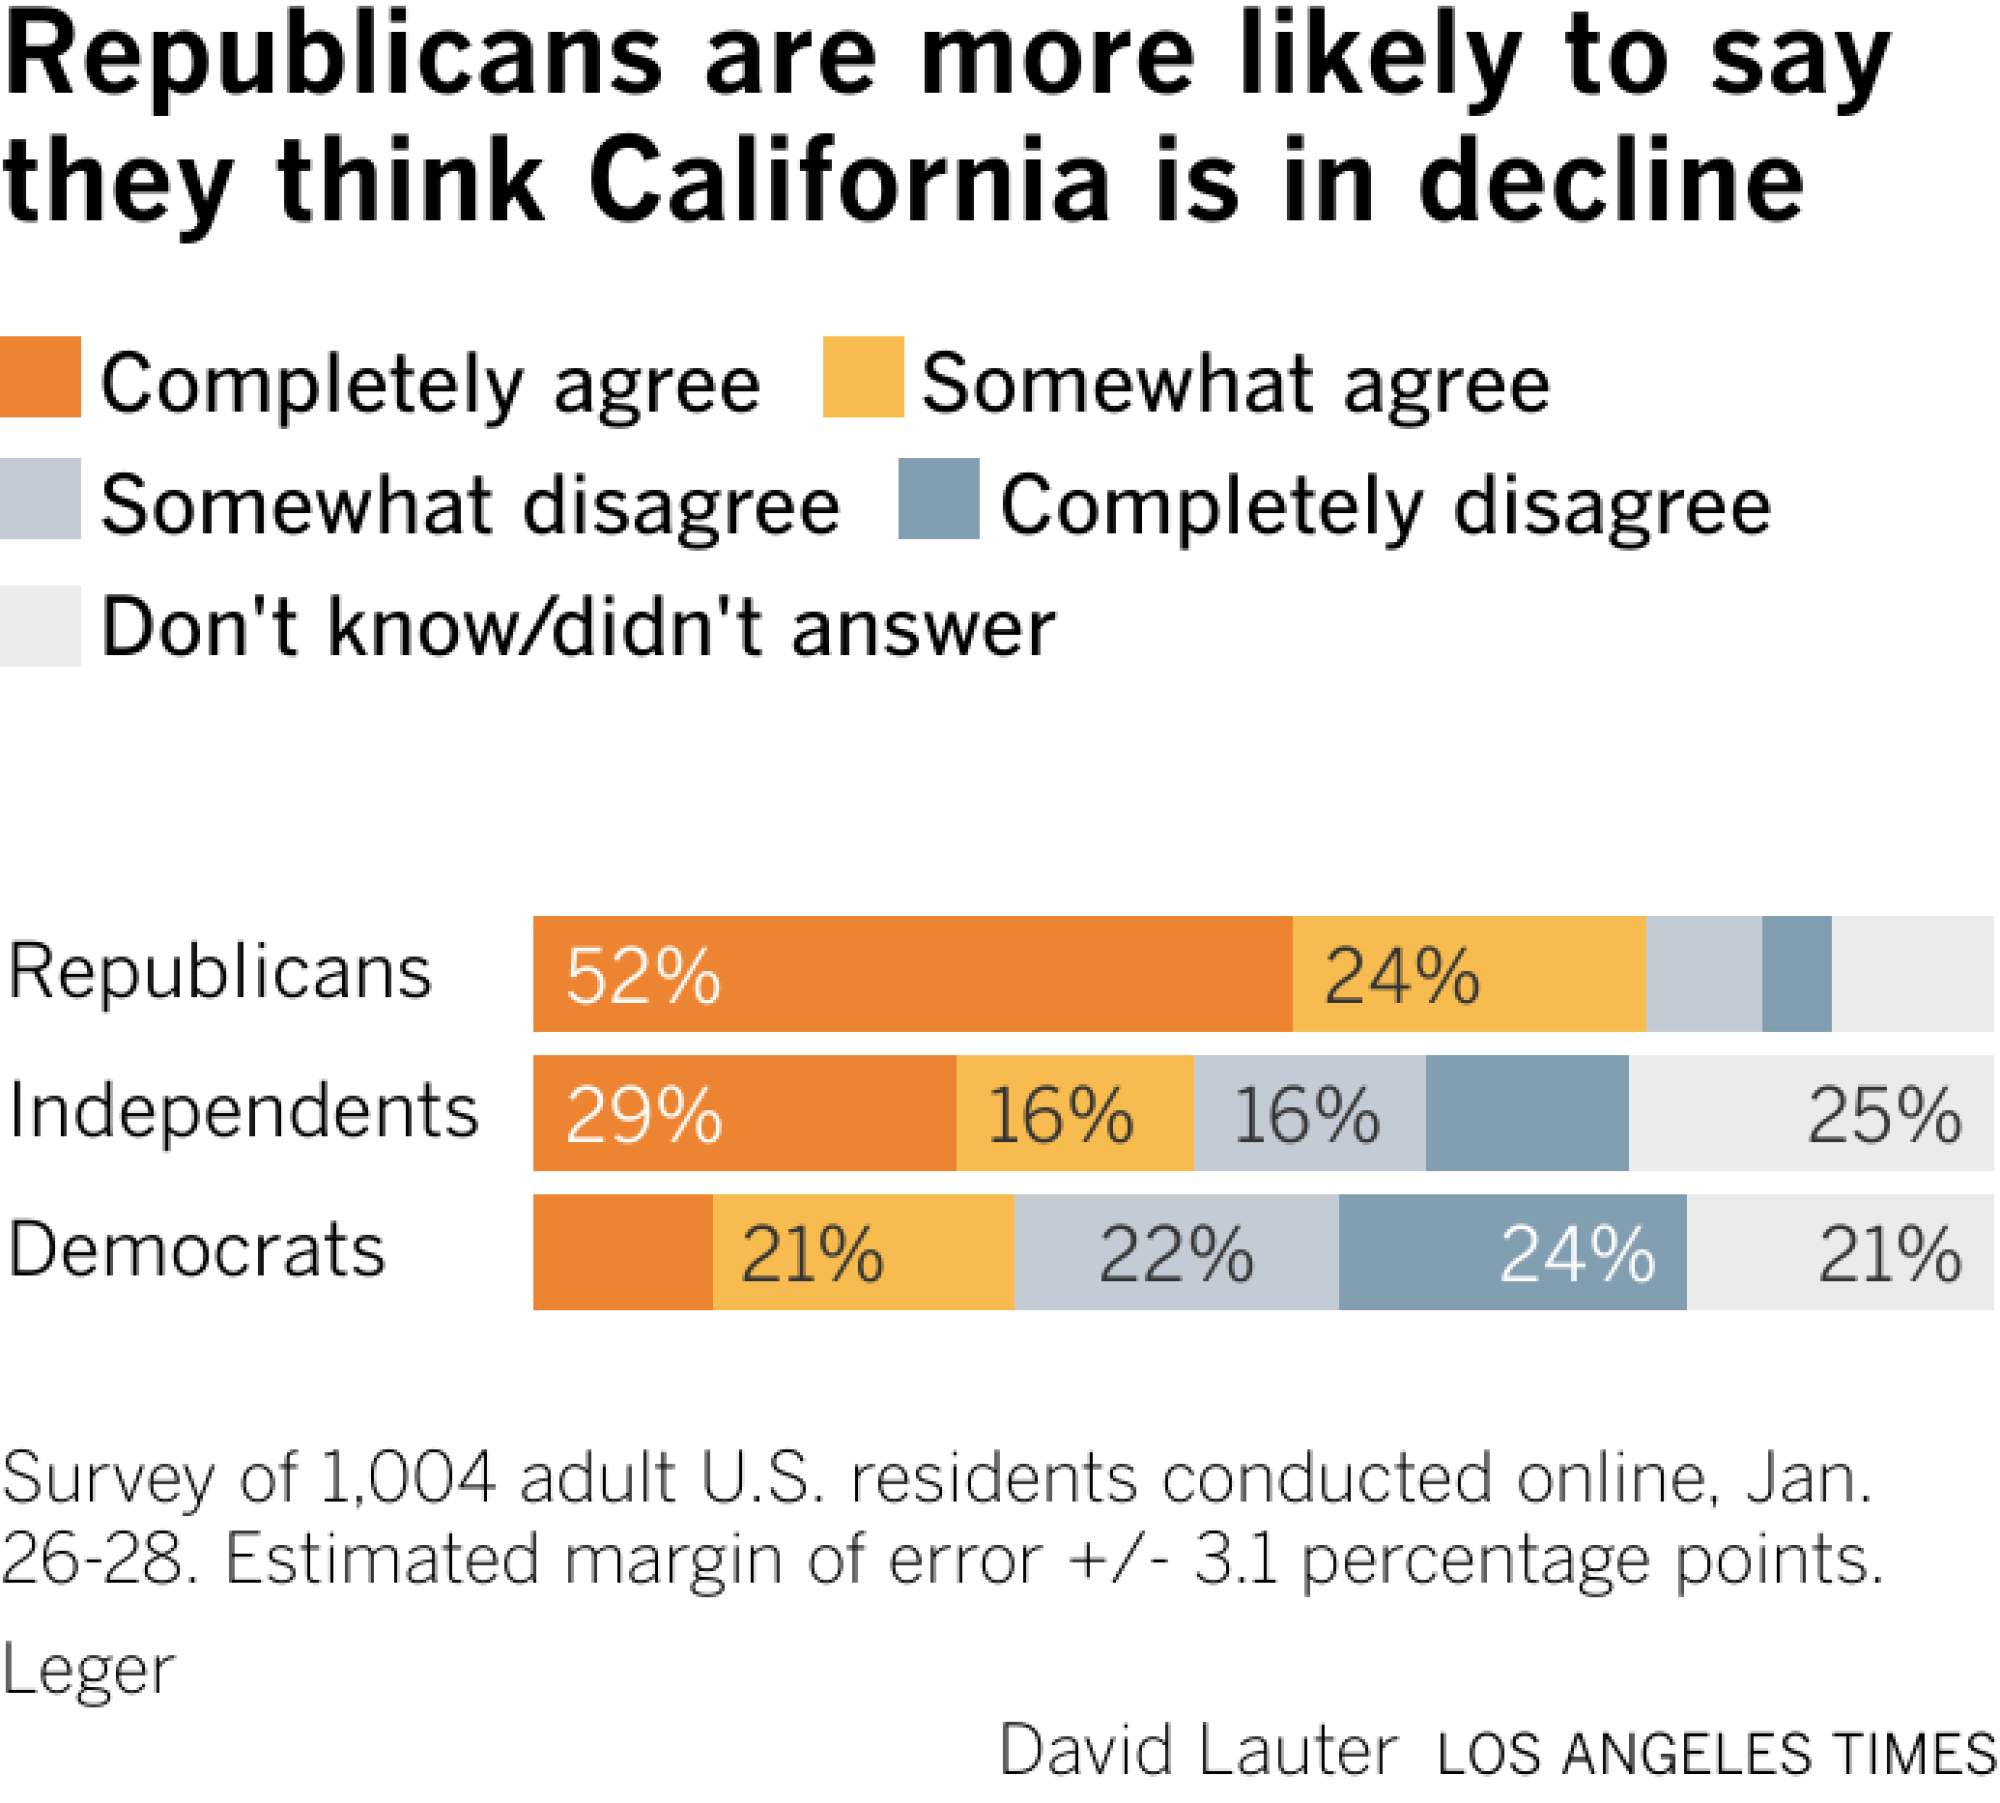 The bar graph shows the percentage of Republicans, independents, and Democrats who completely agree, somewhat agree, somewhat disagree, or completely disagree that California is in decline.